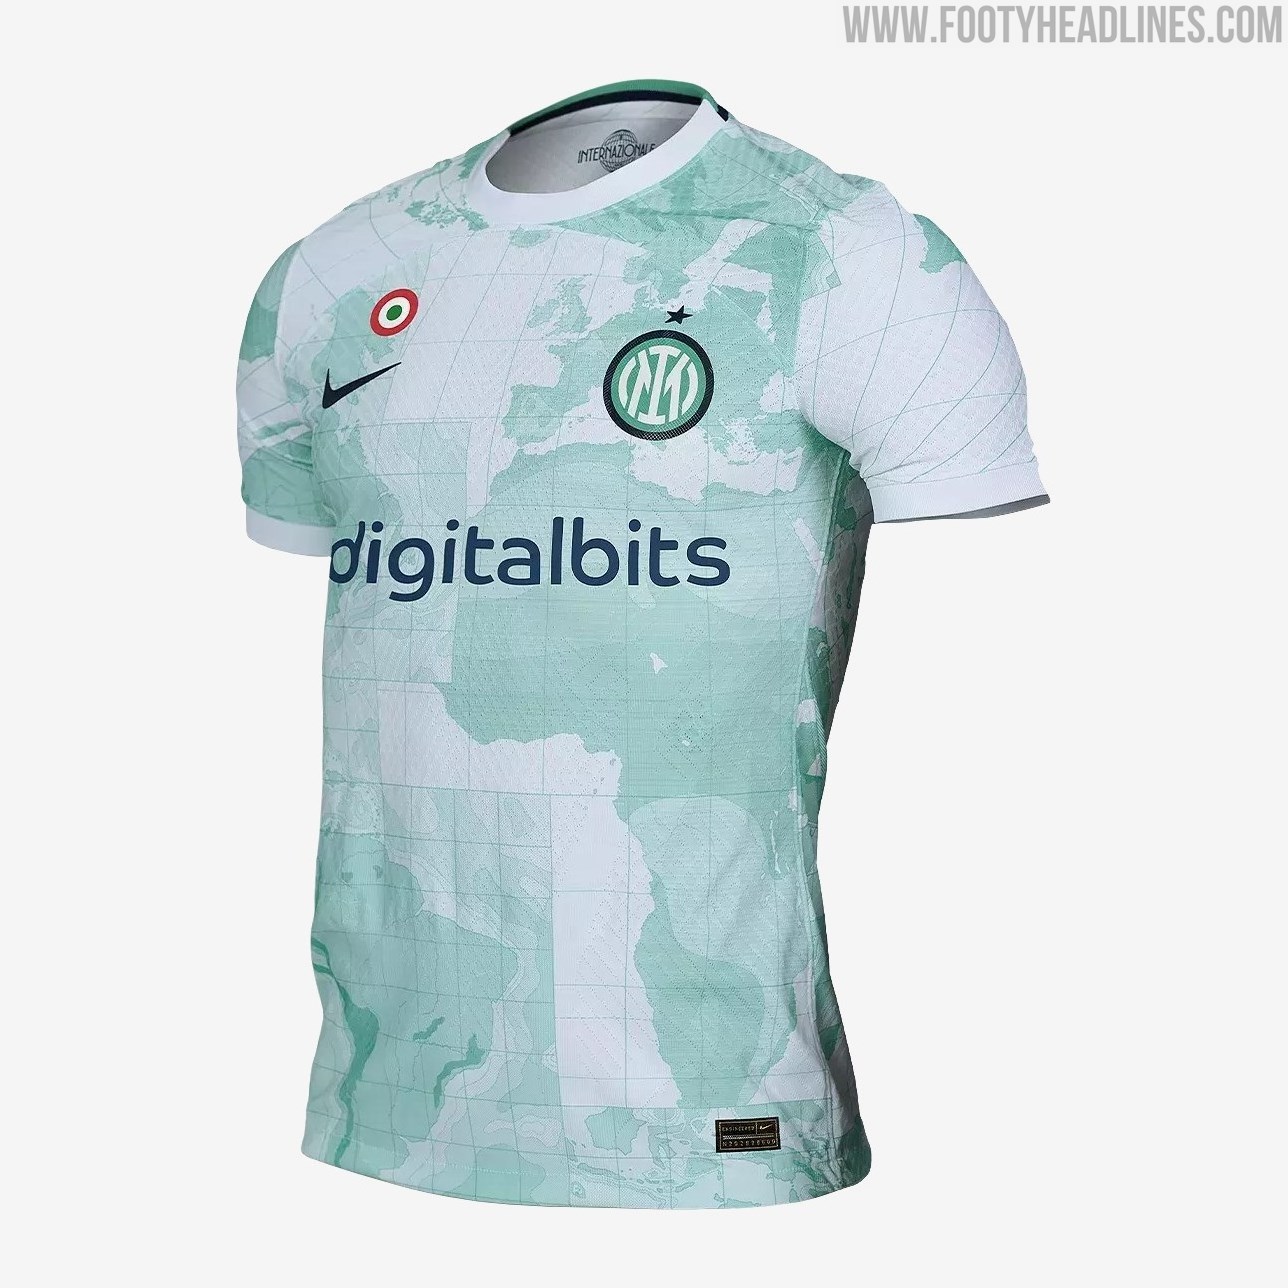 10 Rumored Away Kits For 2022-23 - Here Is How Accurate Each Kit Is -  Footy Headlines